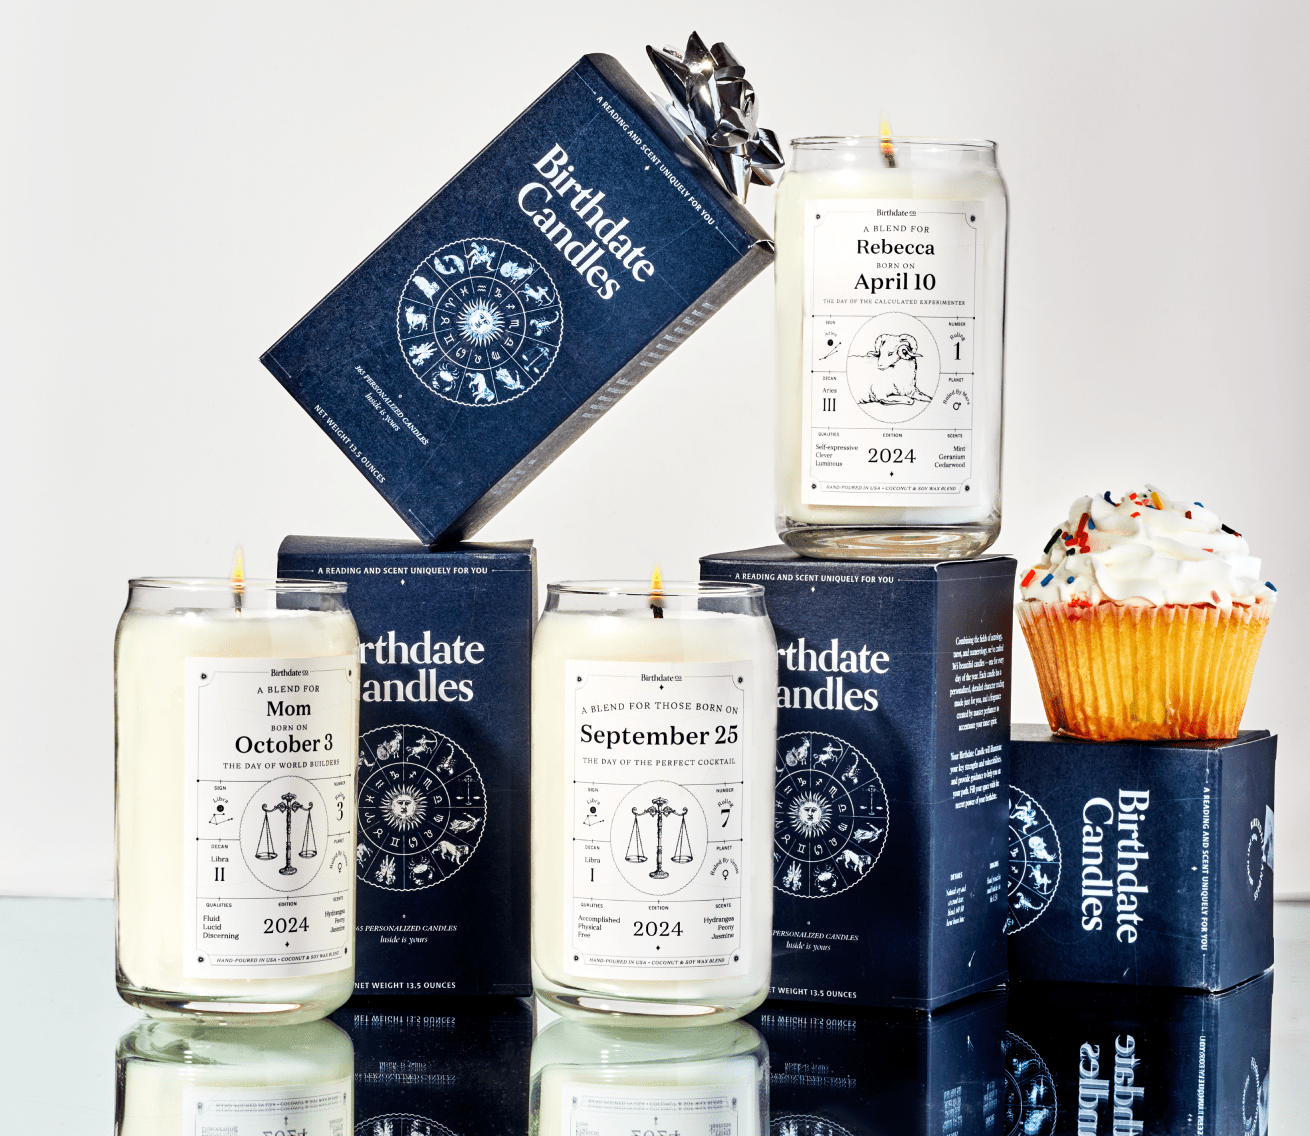 The Birthdate Candle Gift Set